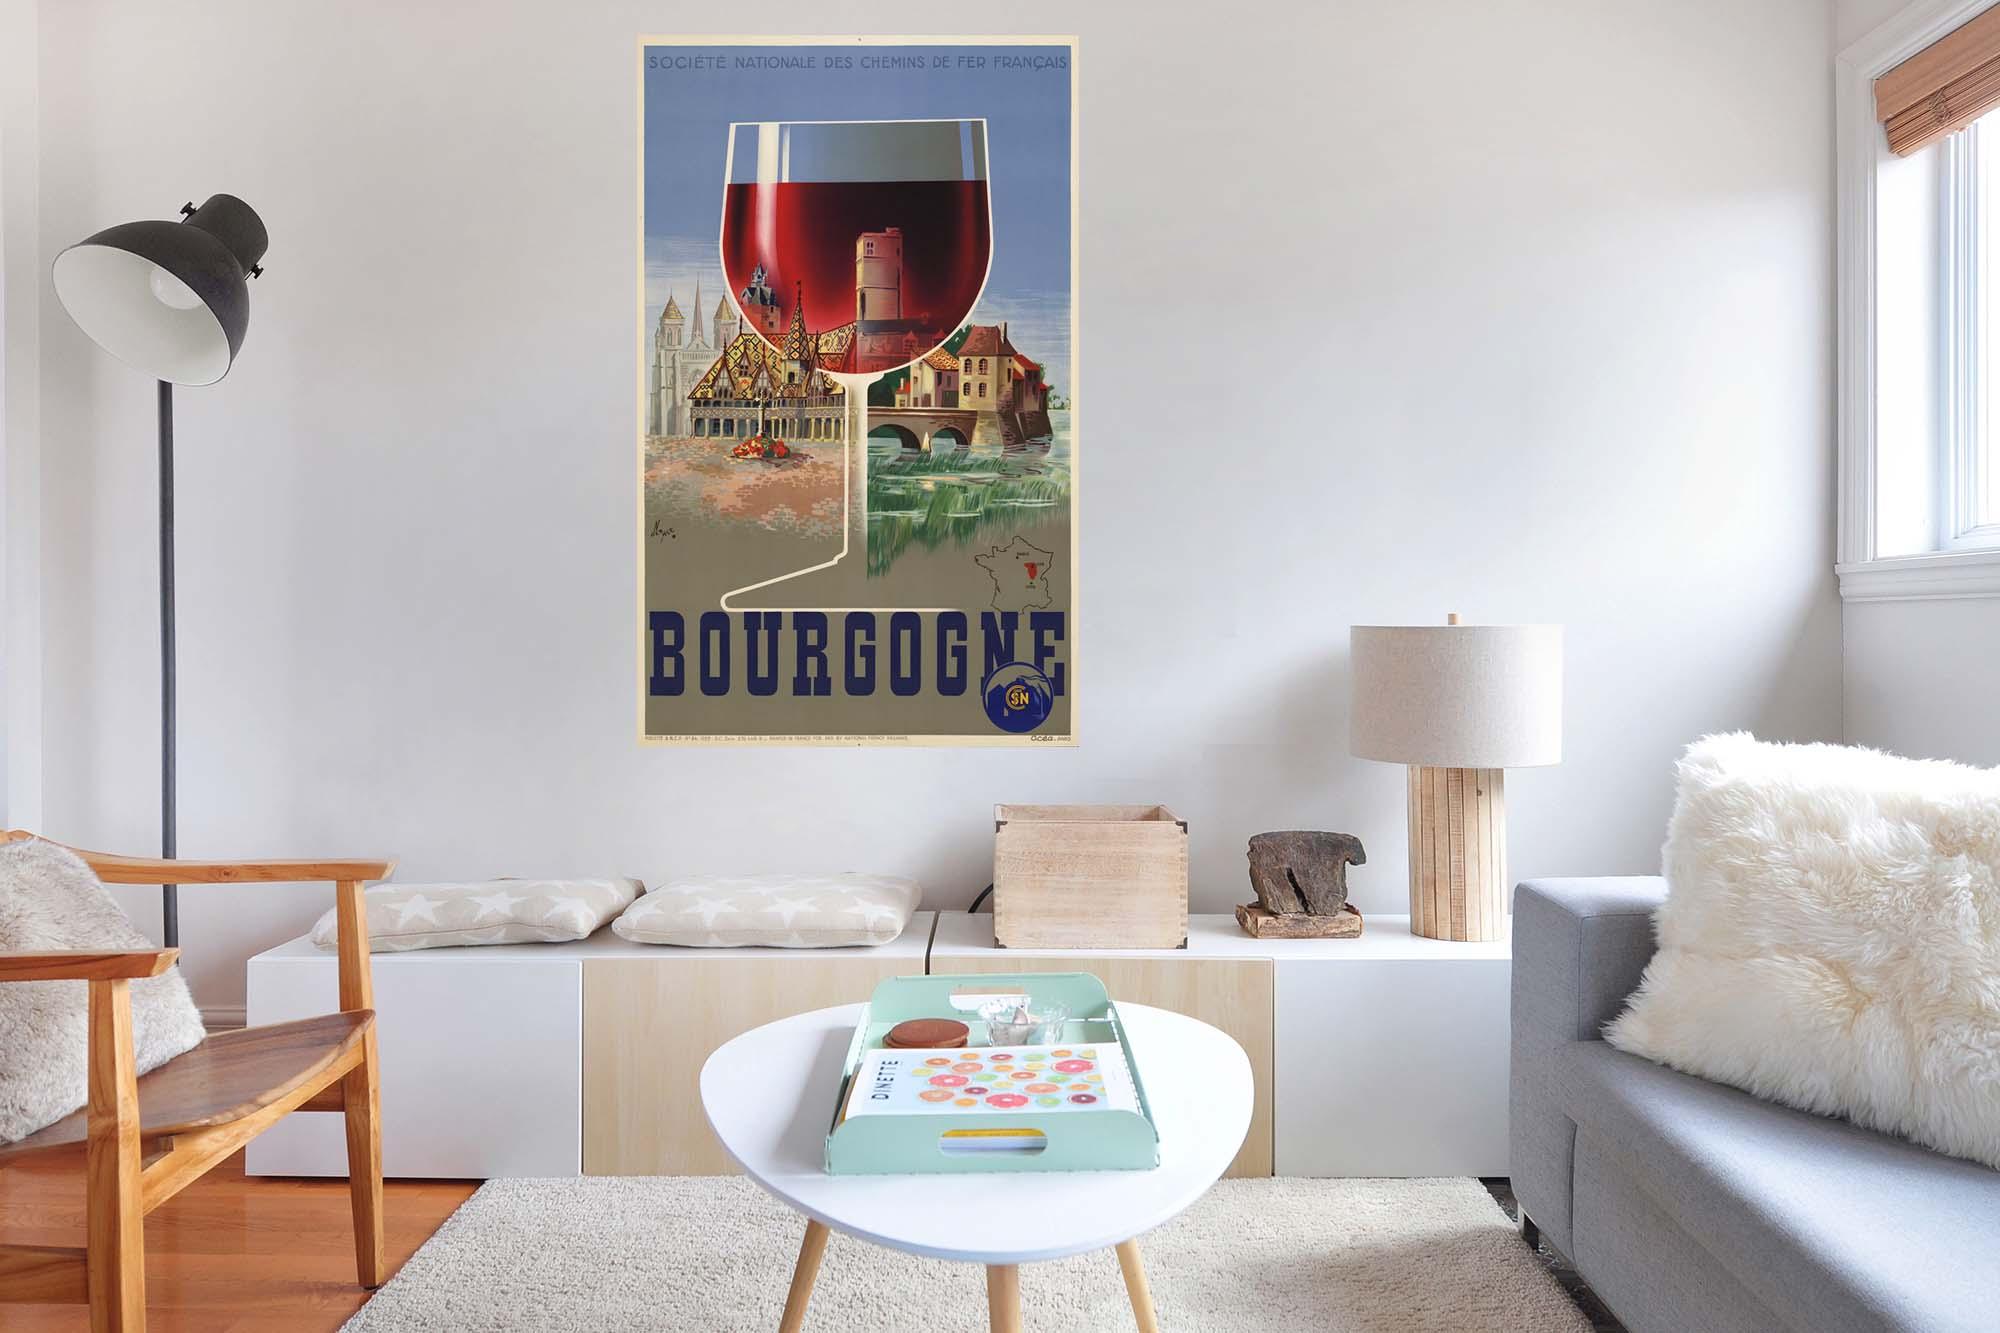 CoolWalls.ca diecut Bourgogne SNCF from 1939 Wine Poster, Wall Decal Sticker Wallpaper, PEEL-N-STICK, removable anytime. Great for a classroom